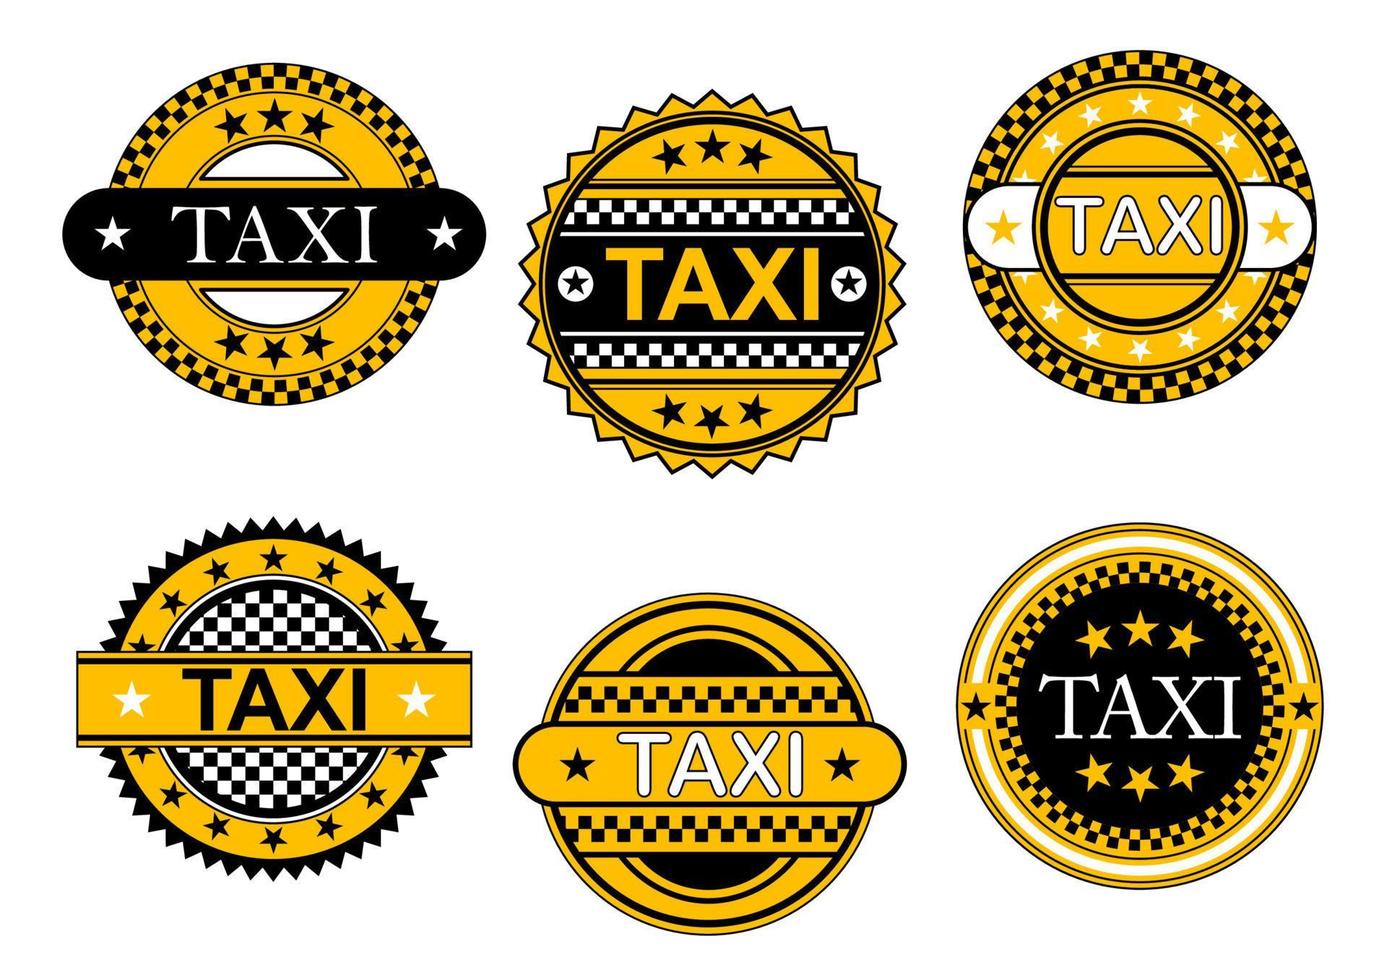 Taxi service emblems and signs vector